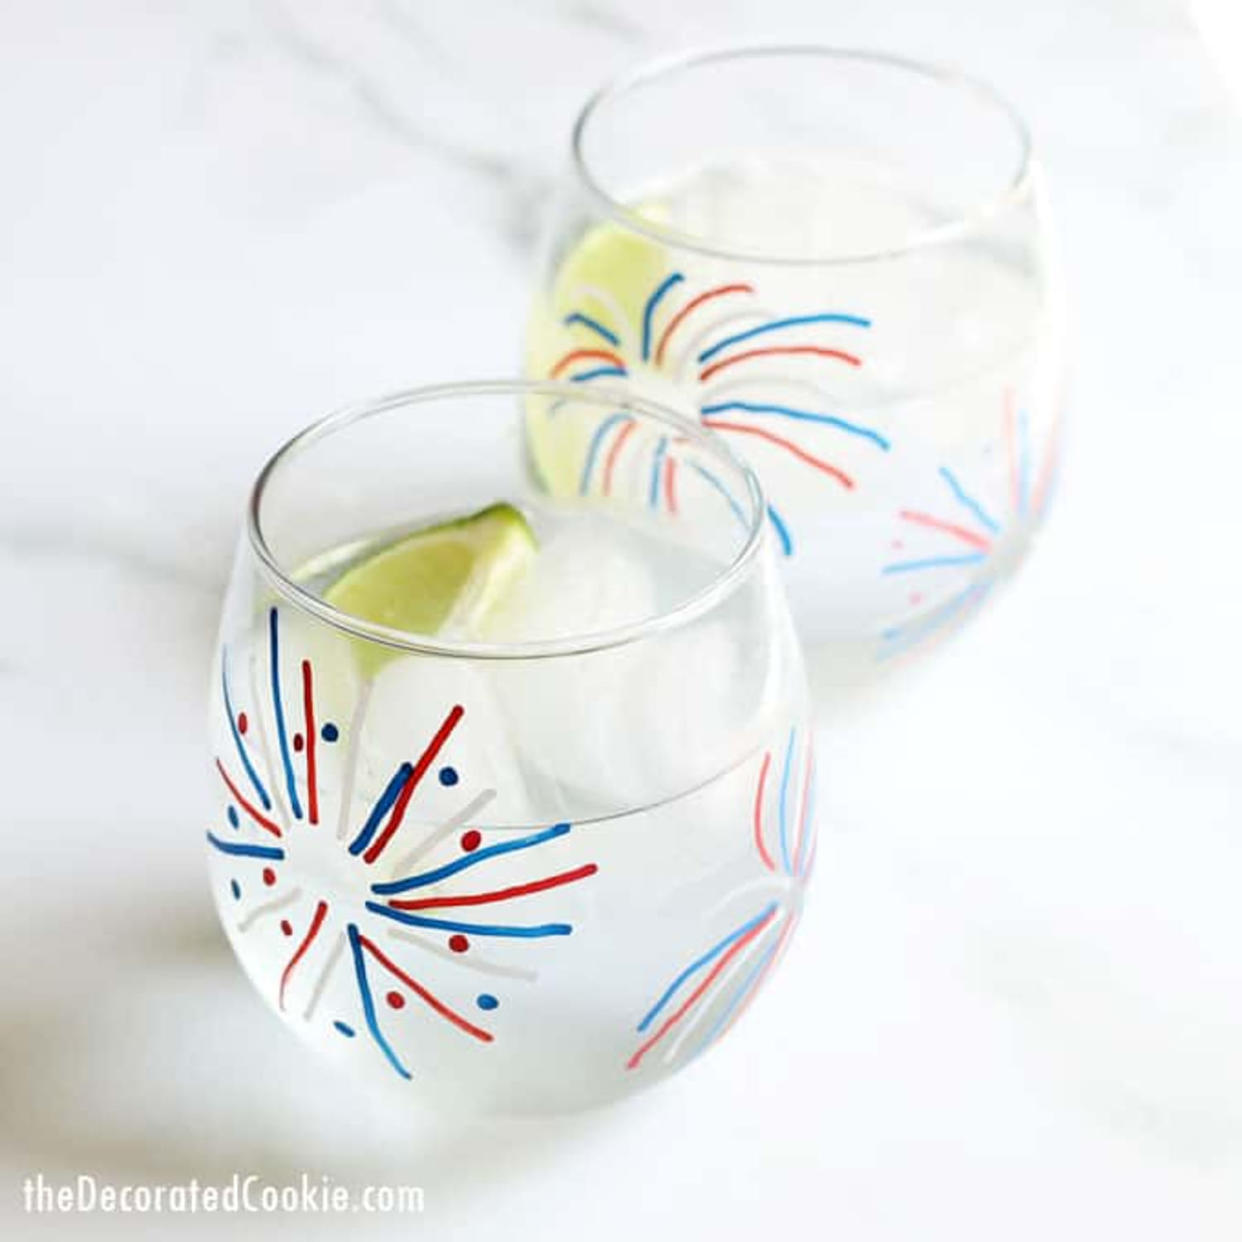 wine glasses with red, white and blue fireworks (The Decorated Cookie )